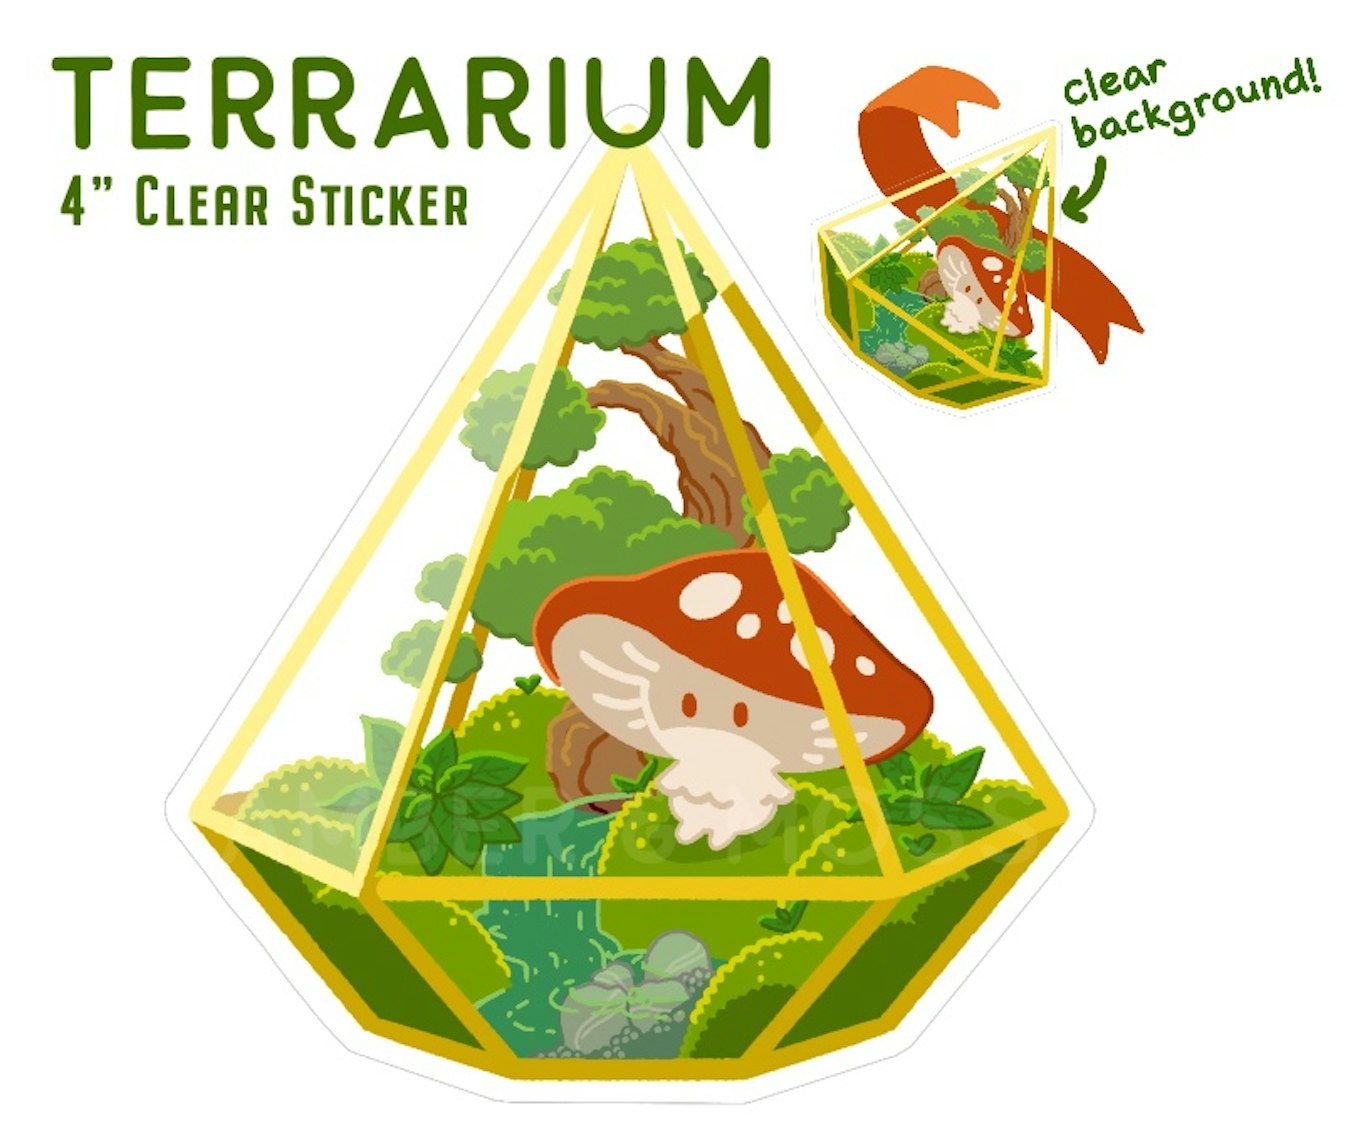 Terrarium sticker is of a small glass terrarium with gold joints. Inside is Amini mushroom sprite sitting on moss. There is a little landscape of moss, a small bonsai tree, and some small leafy plants. There is a tiny stream flowing through with rocks at the end.